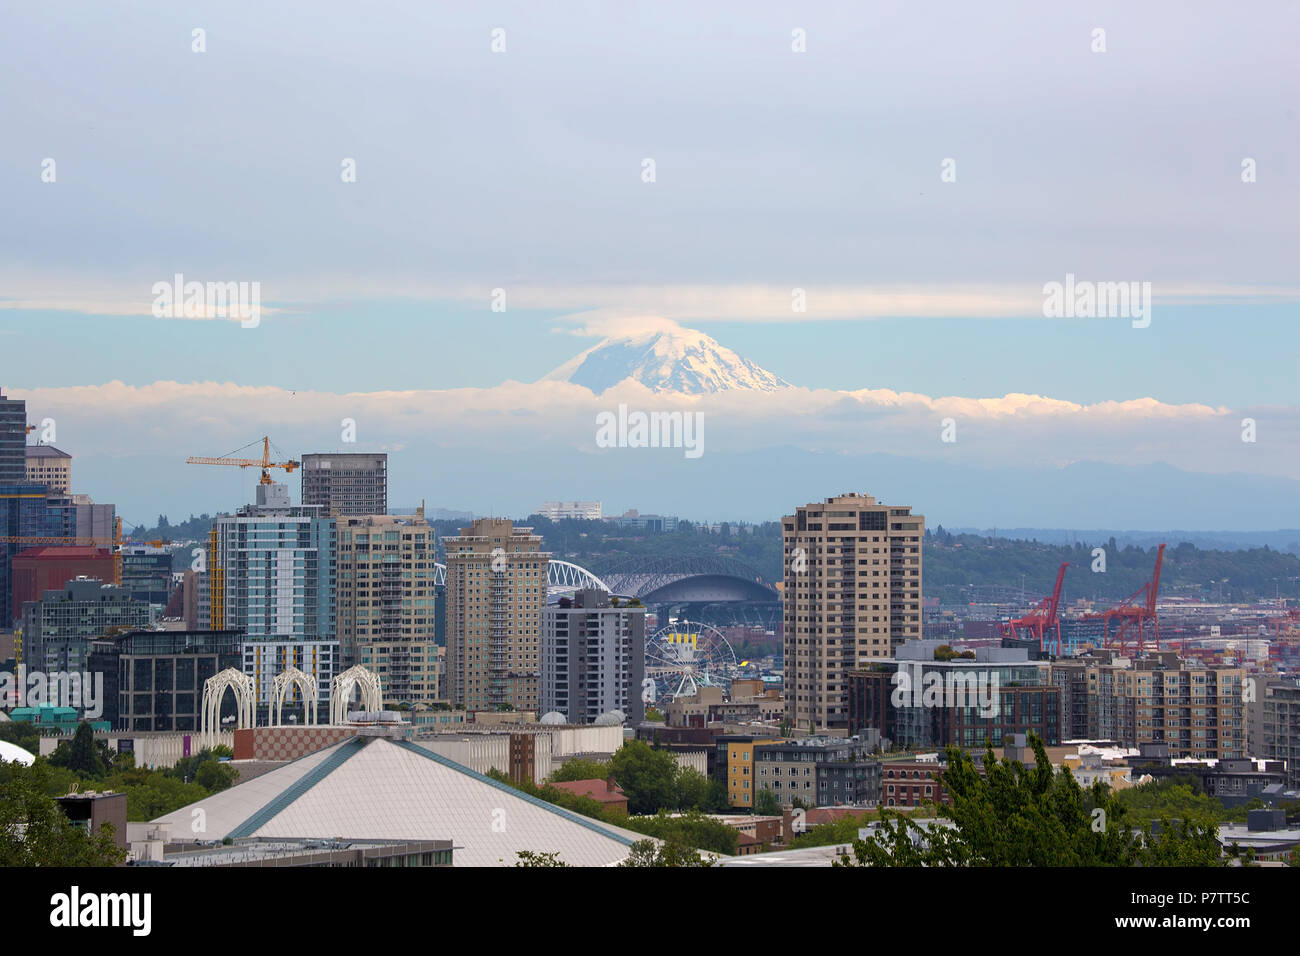 Seattle Washington downtown city skyline with Mount Rainier partially covered in clouds Stock Photo